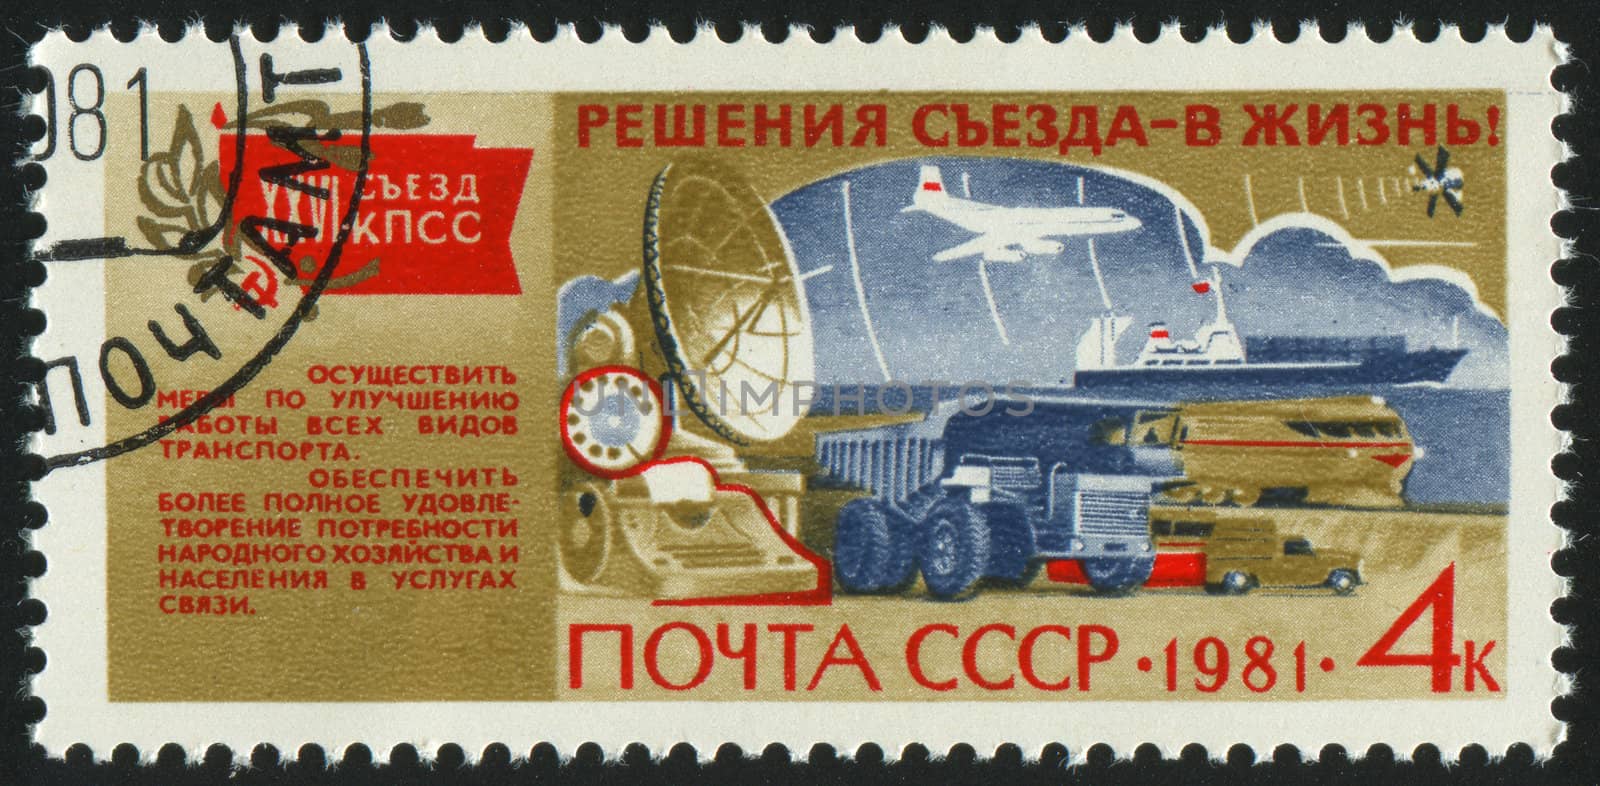 RUSSIA - CIRCA 1981: stamp printed by Russia, shows Industry, circa 1981.